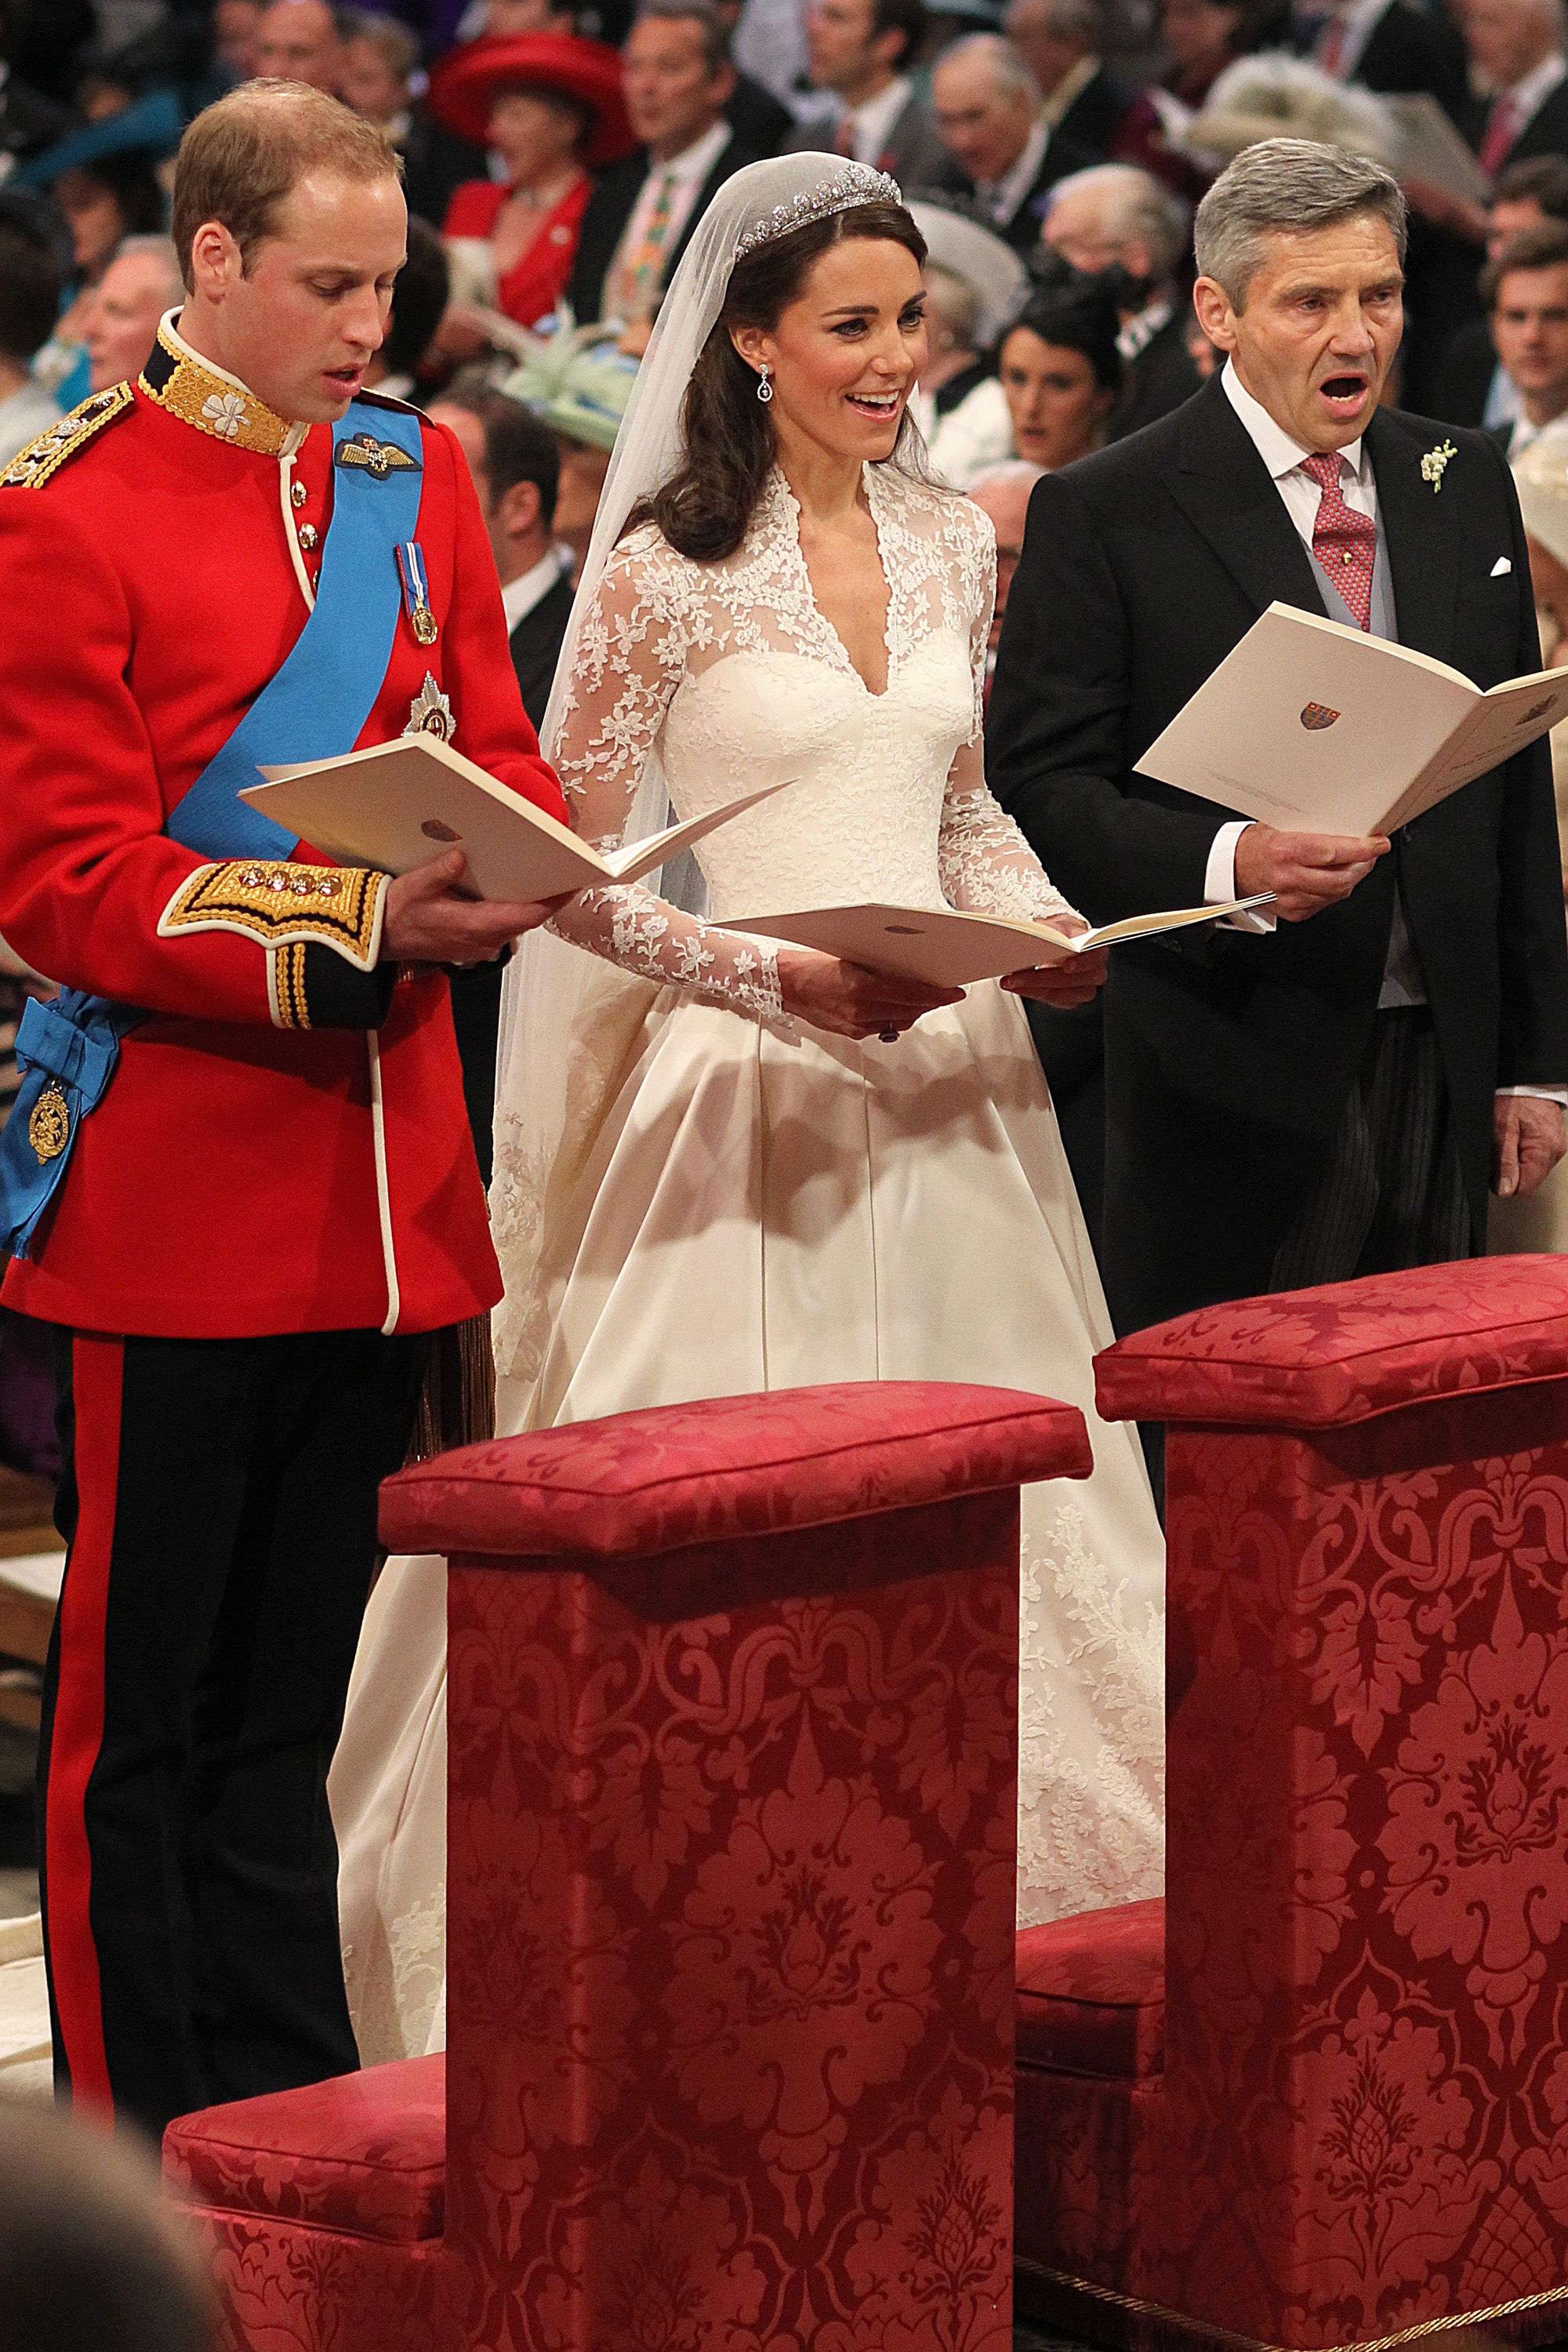 Kate Middleton and Prince William Wedding Photos - Royal Wedding 2011 Pictures